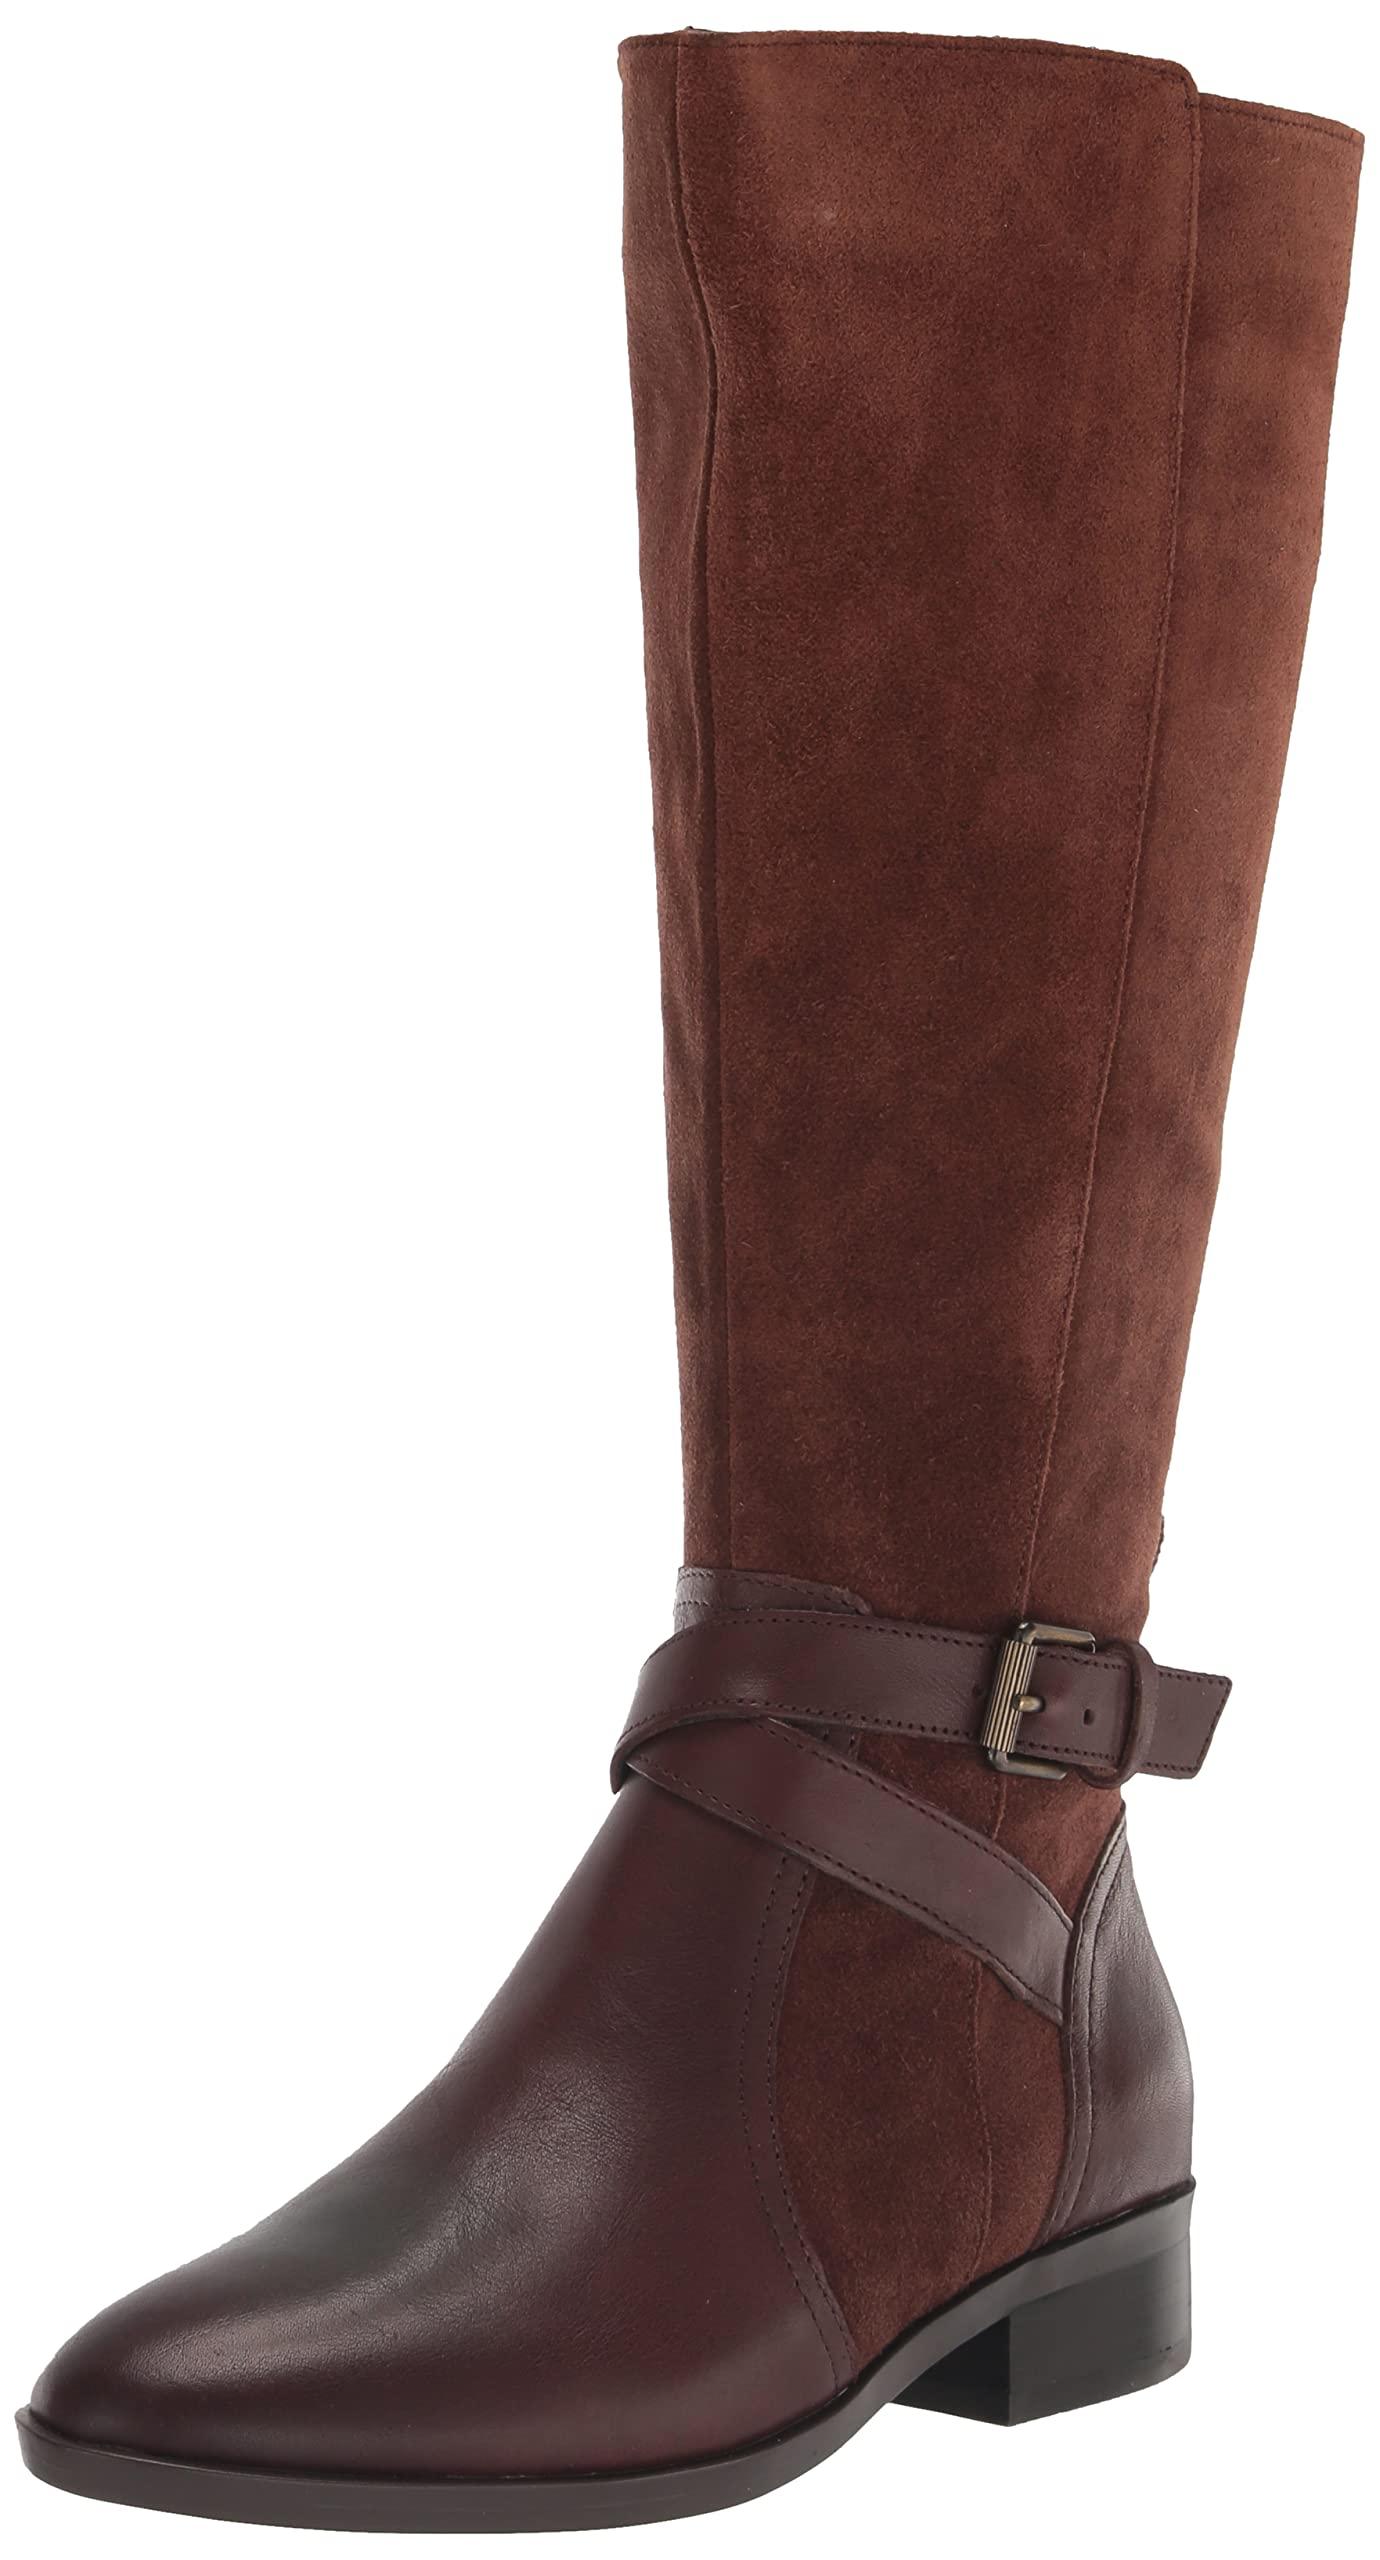 Naturalizer S Rena Knee High Riding Boot Chocolate Bar Suede/leather Wide  Calf 5.5 M in Brown | Lyst